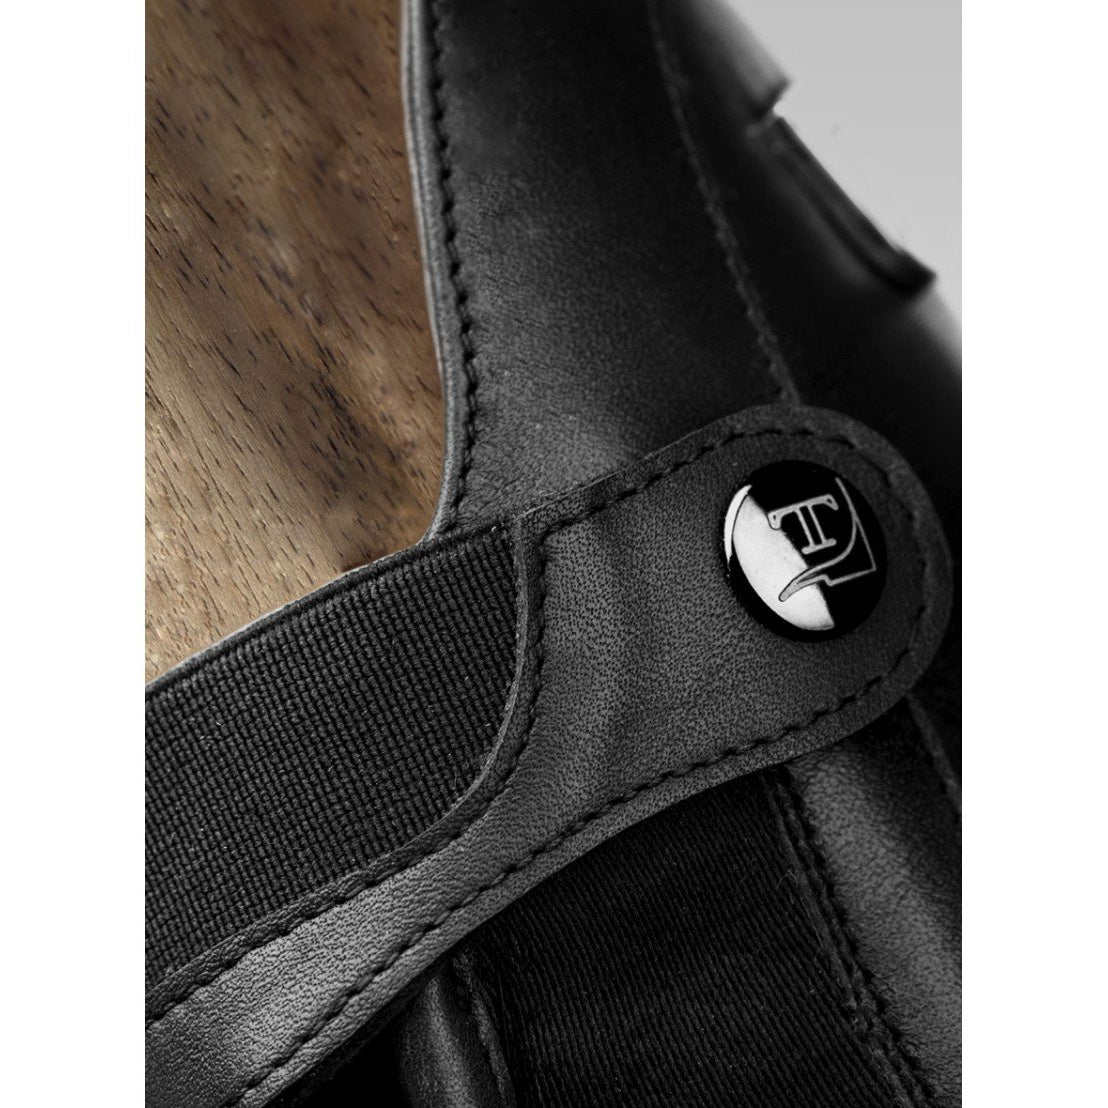 Tucci Marilyn Plain Chap-Trailrace Equestrian Outfitters-The Equestrian